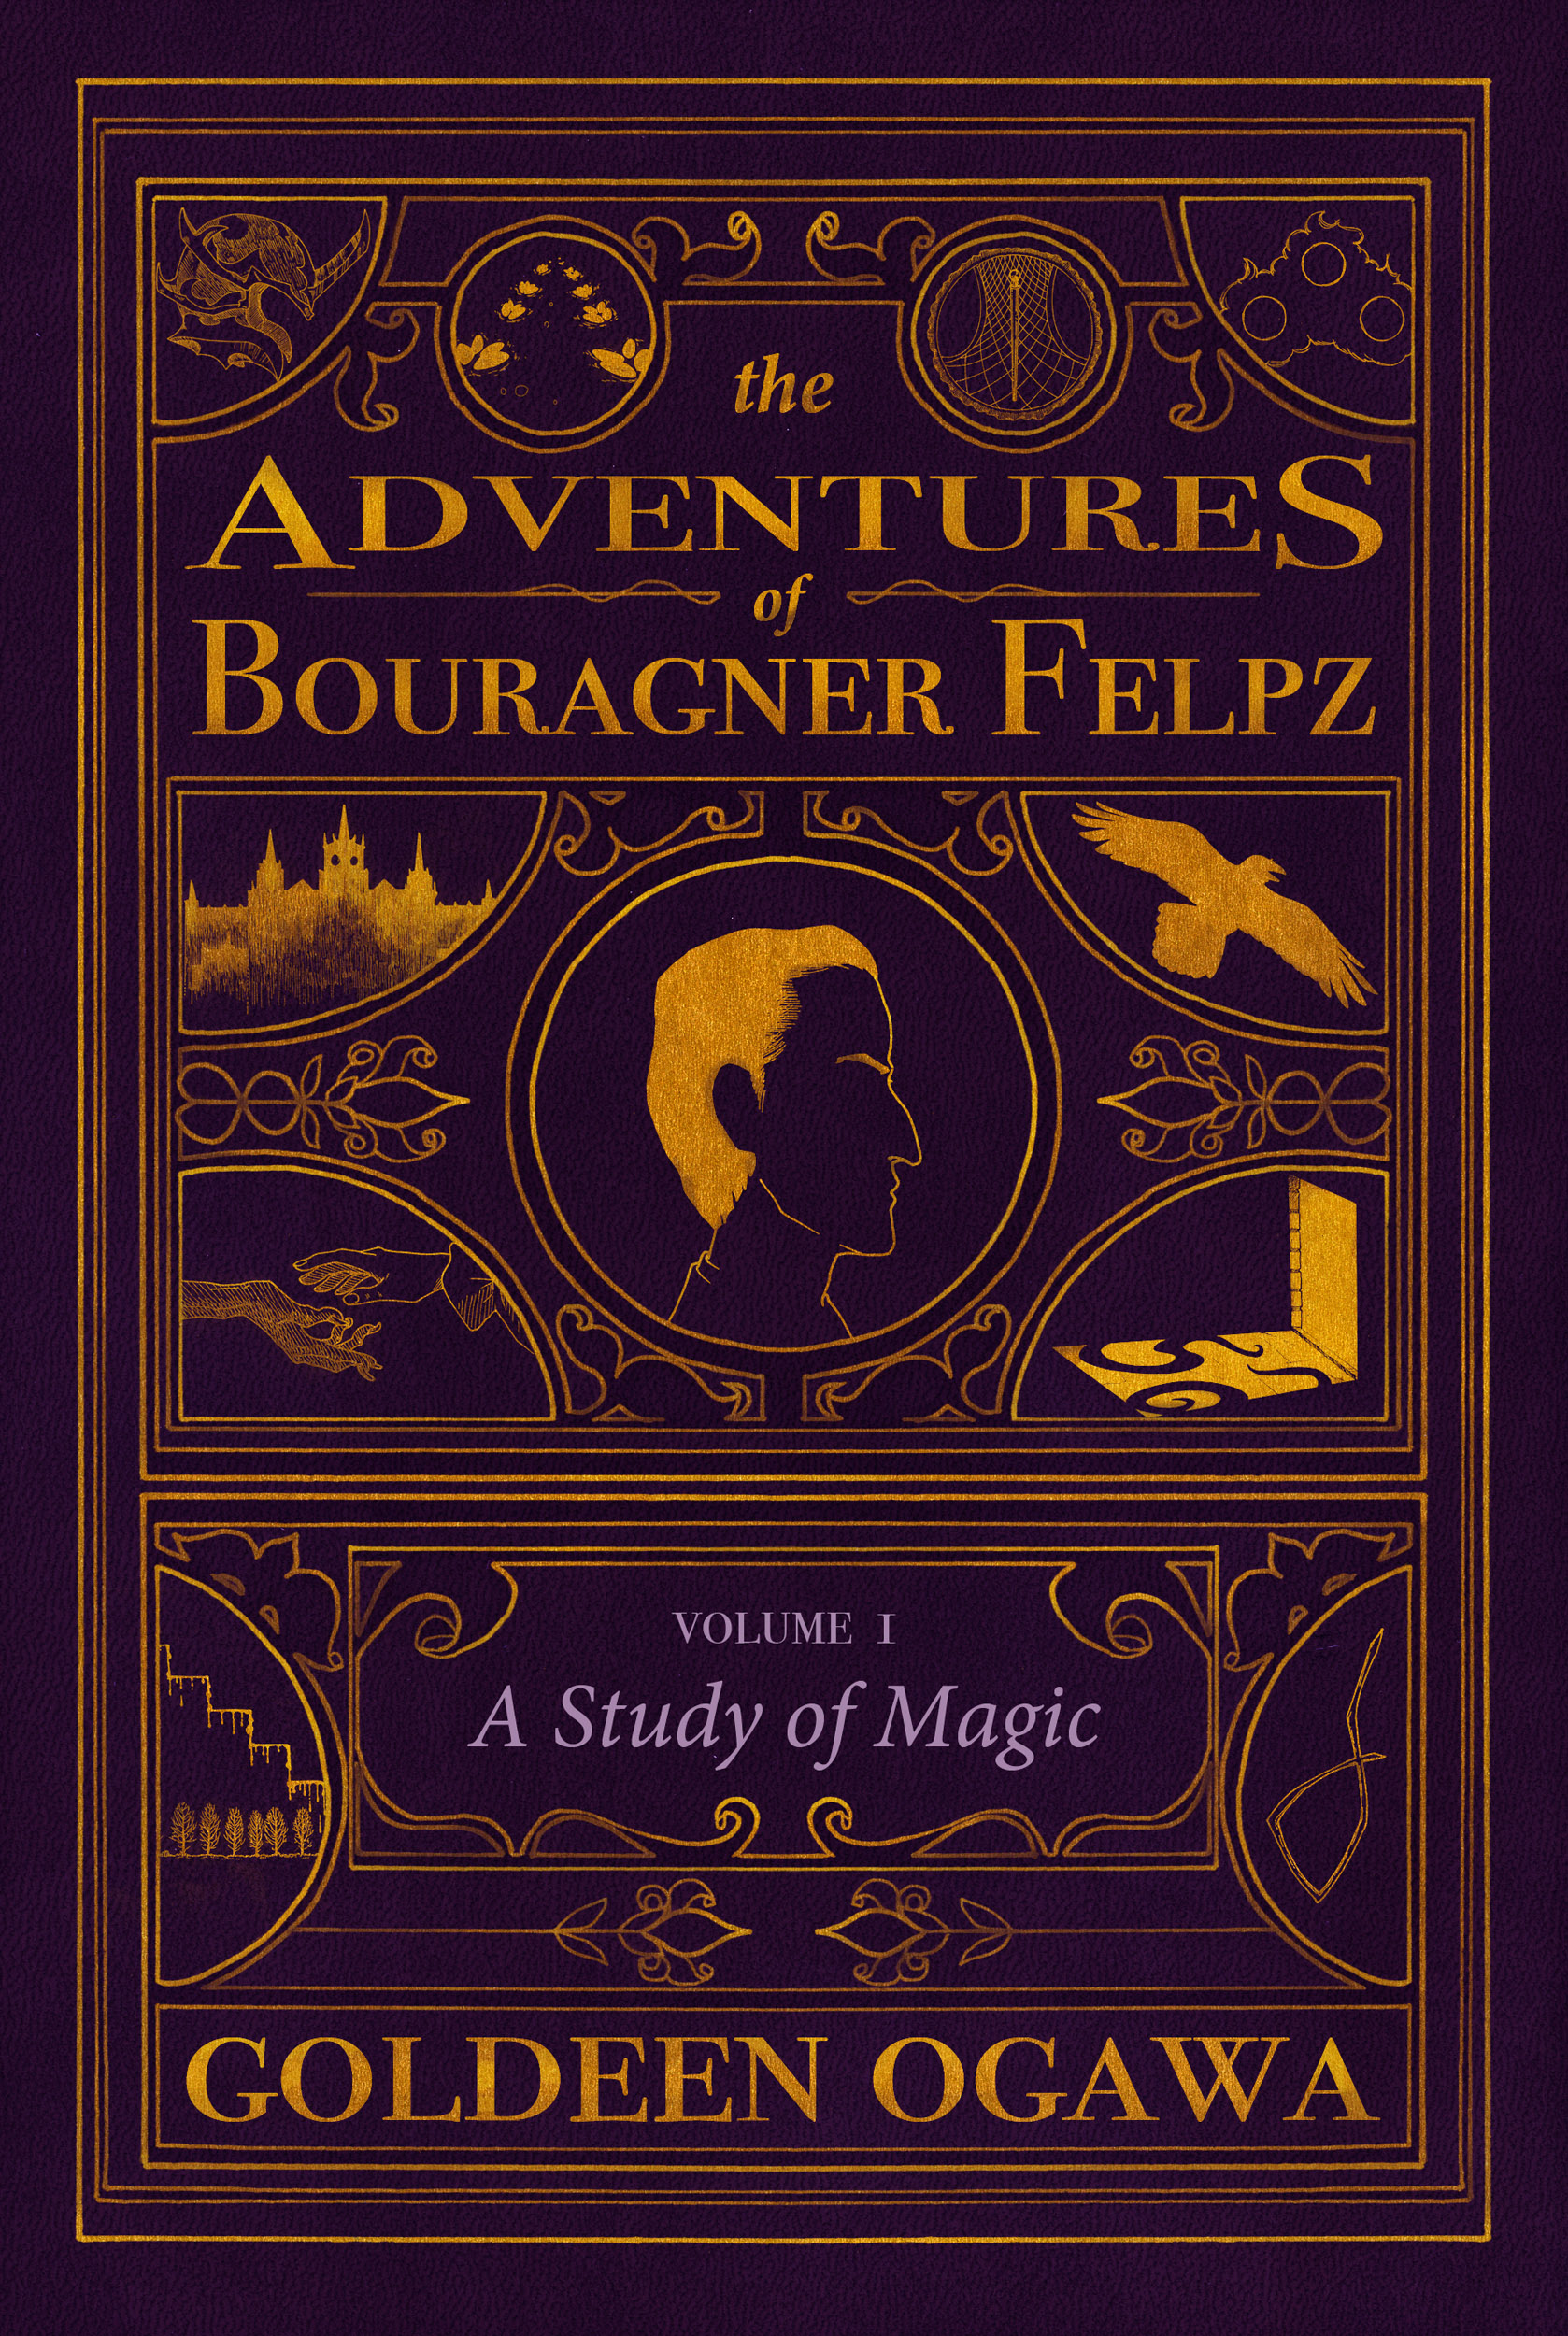 Cover image for Vol I: A Study of Magic
The first eleven stories chronicle Corianne's early adventures with Bouragner Felpz—from their first awkward foray into a cursed mansion, to the last mission Corianne undertook as a young woman.